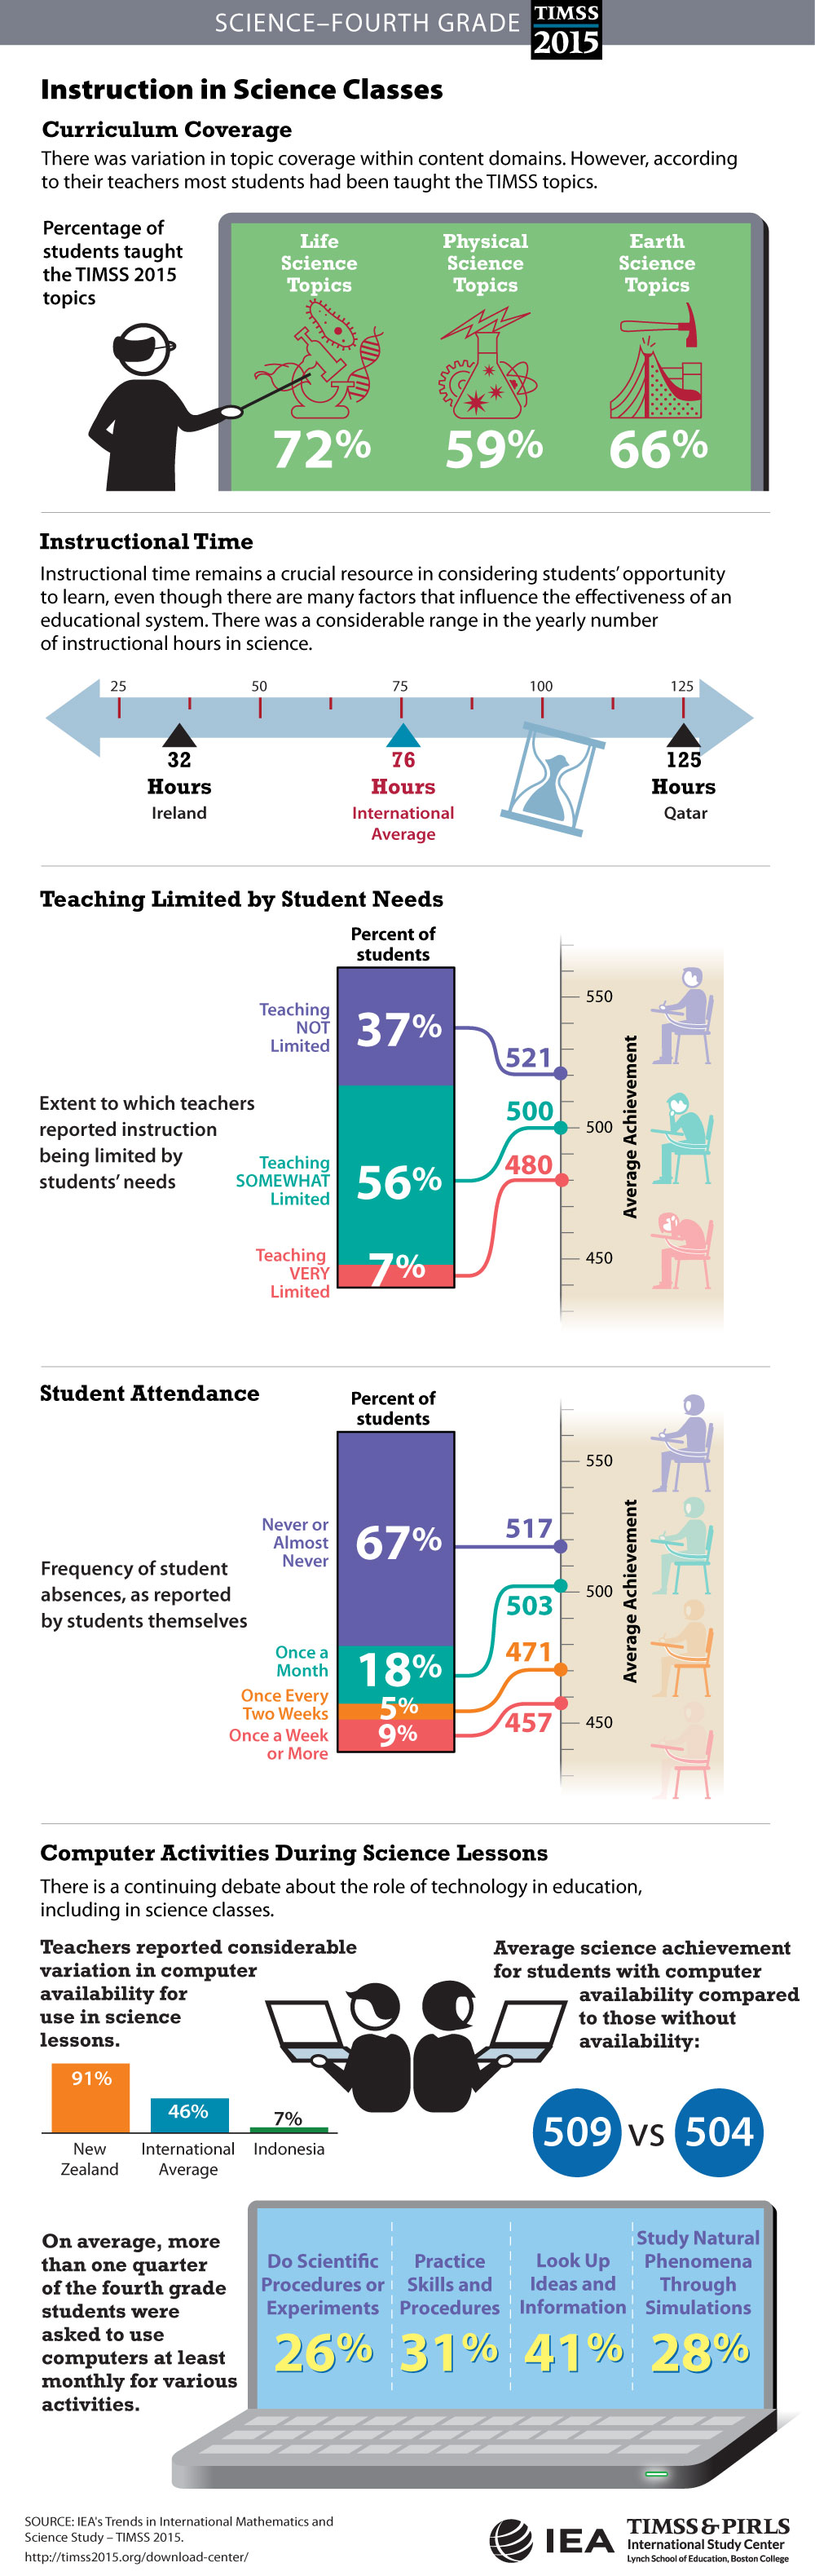 Classroom Instruction (G4) Infographic